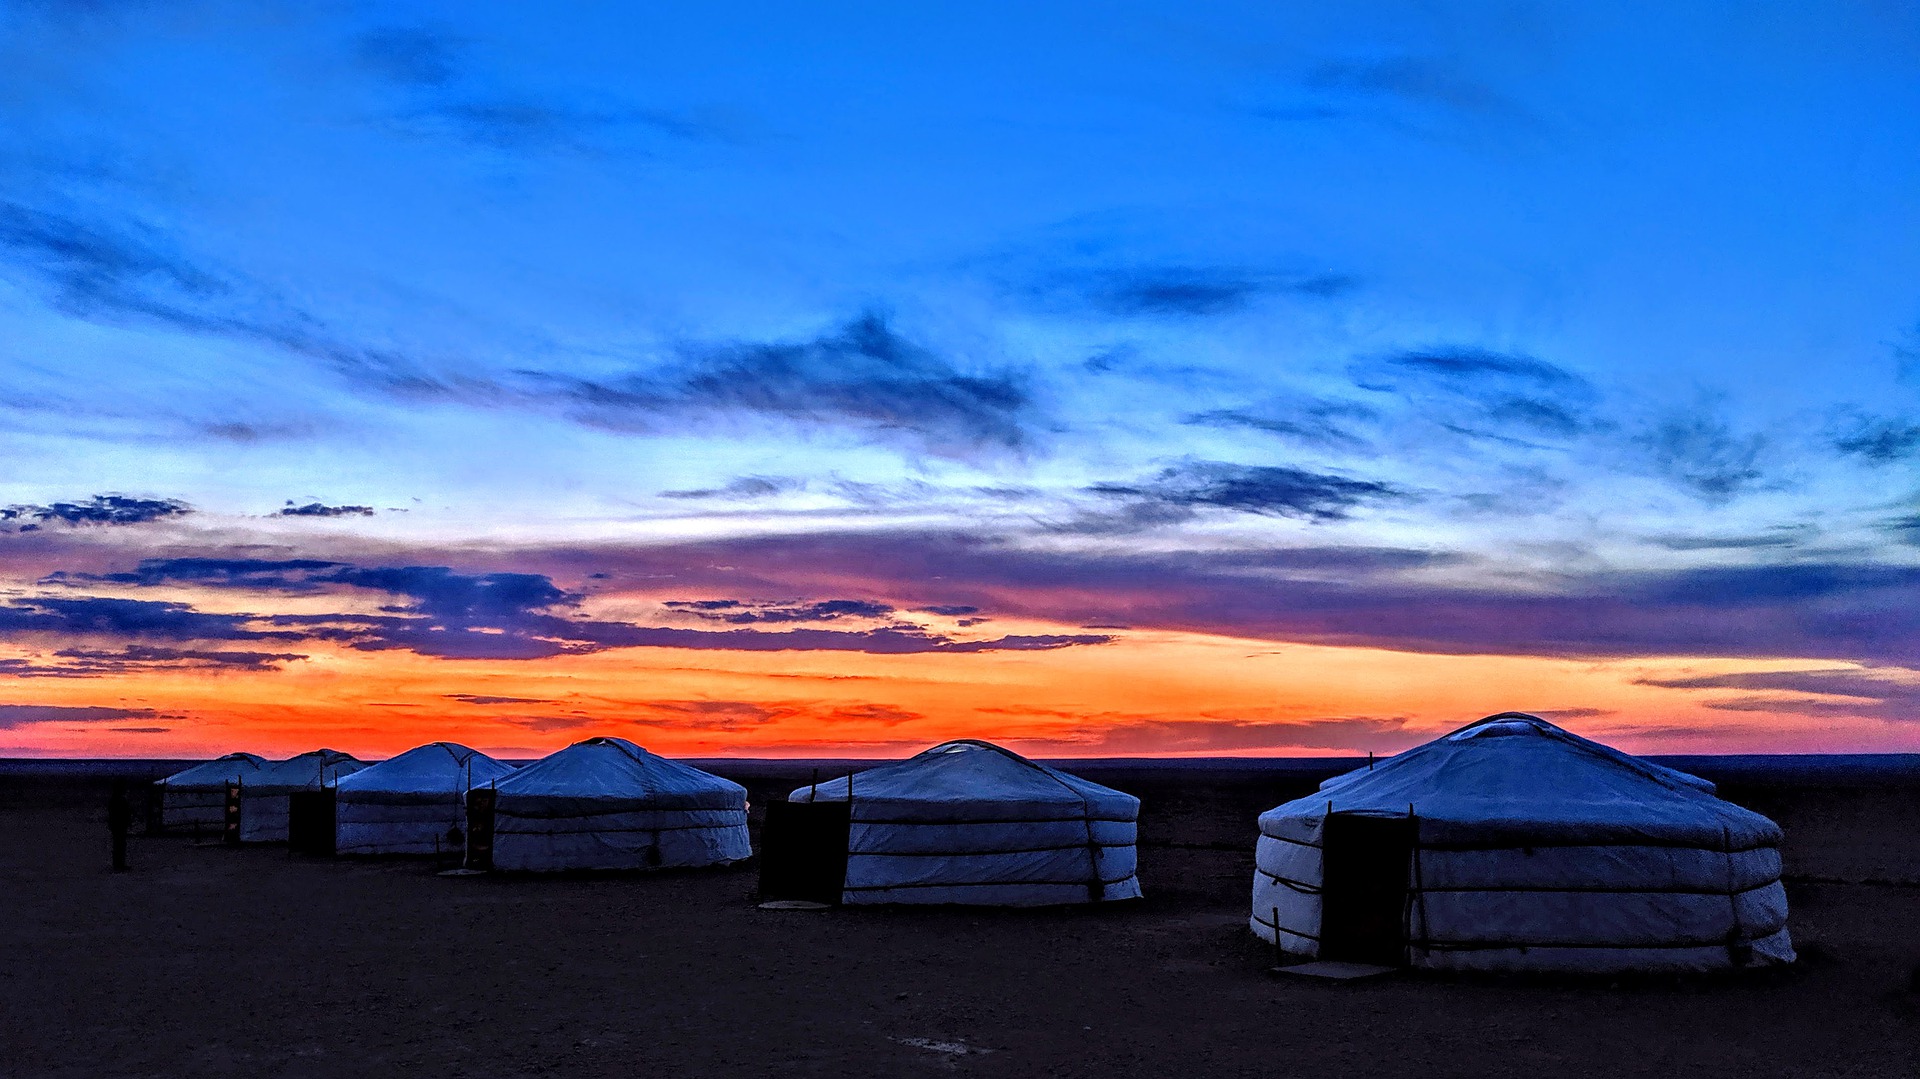 Yurts Underneath a colourful sunset